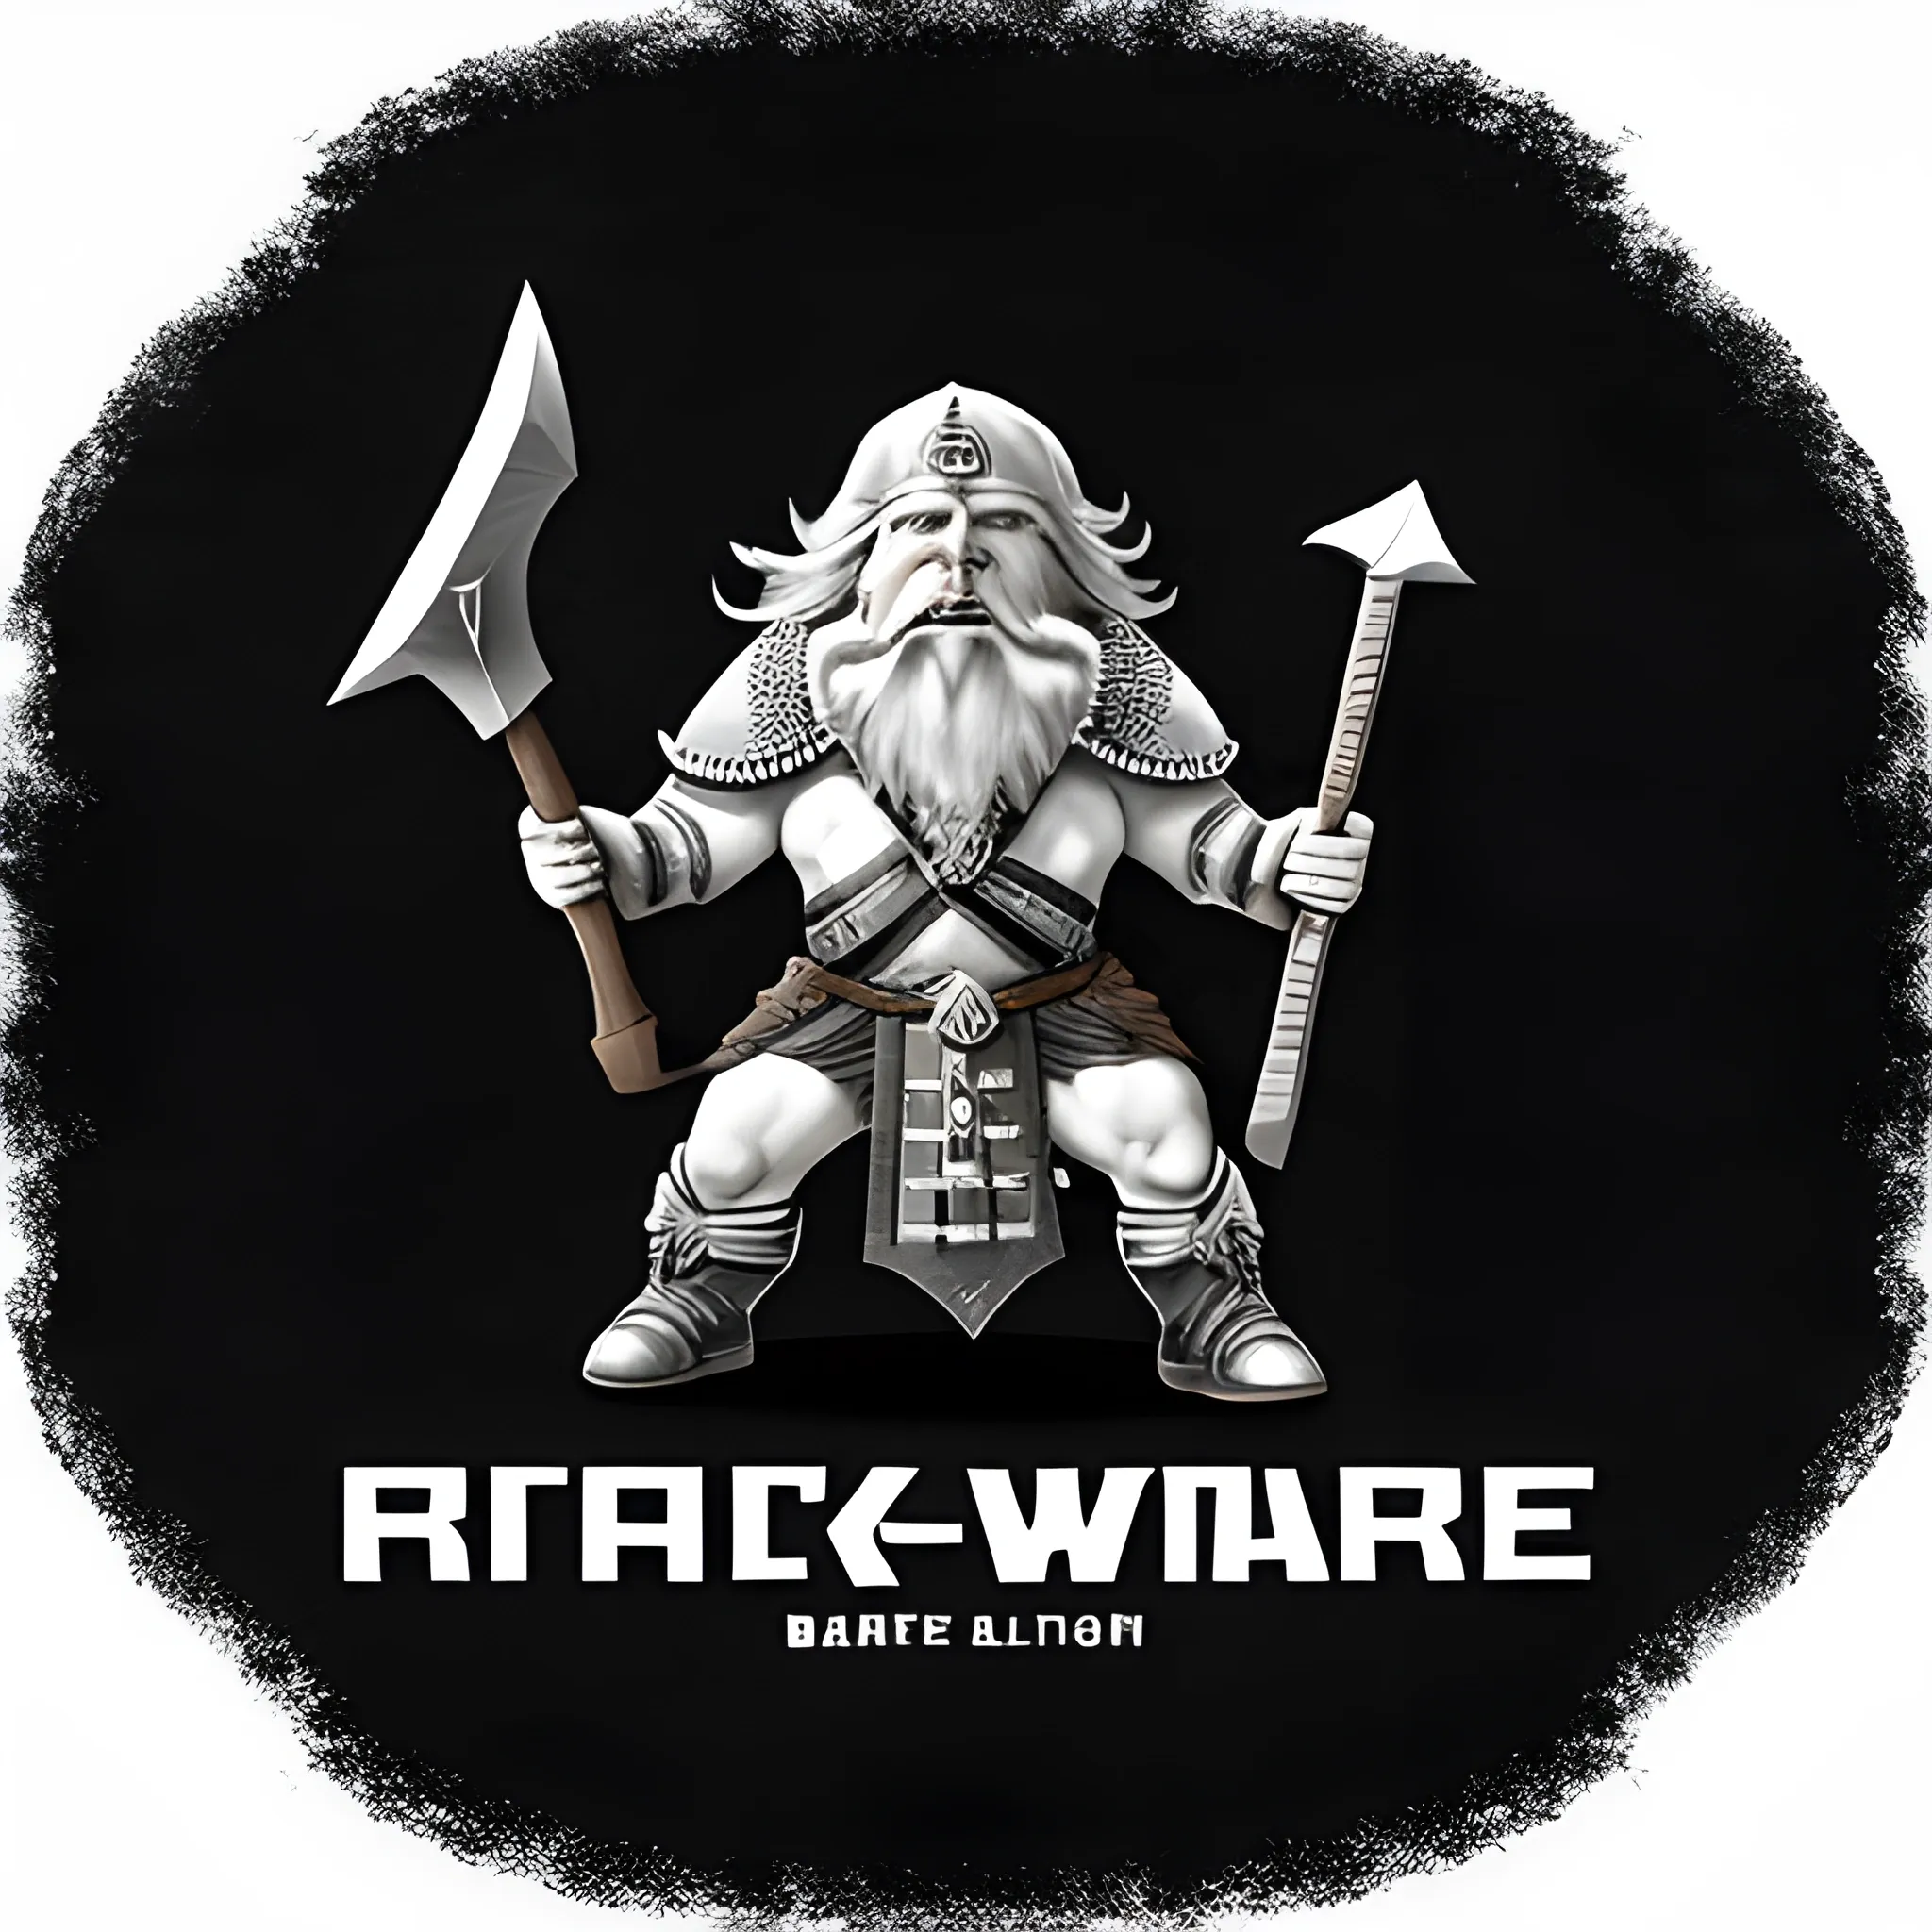 White Dwarf, logo, holding axe and pickaxe, ready to fight, warcry, black background